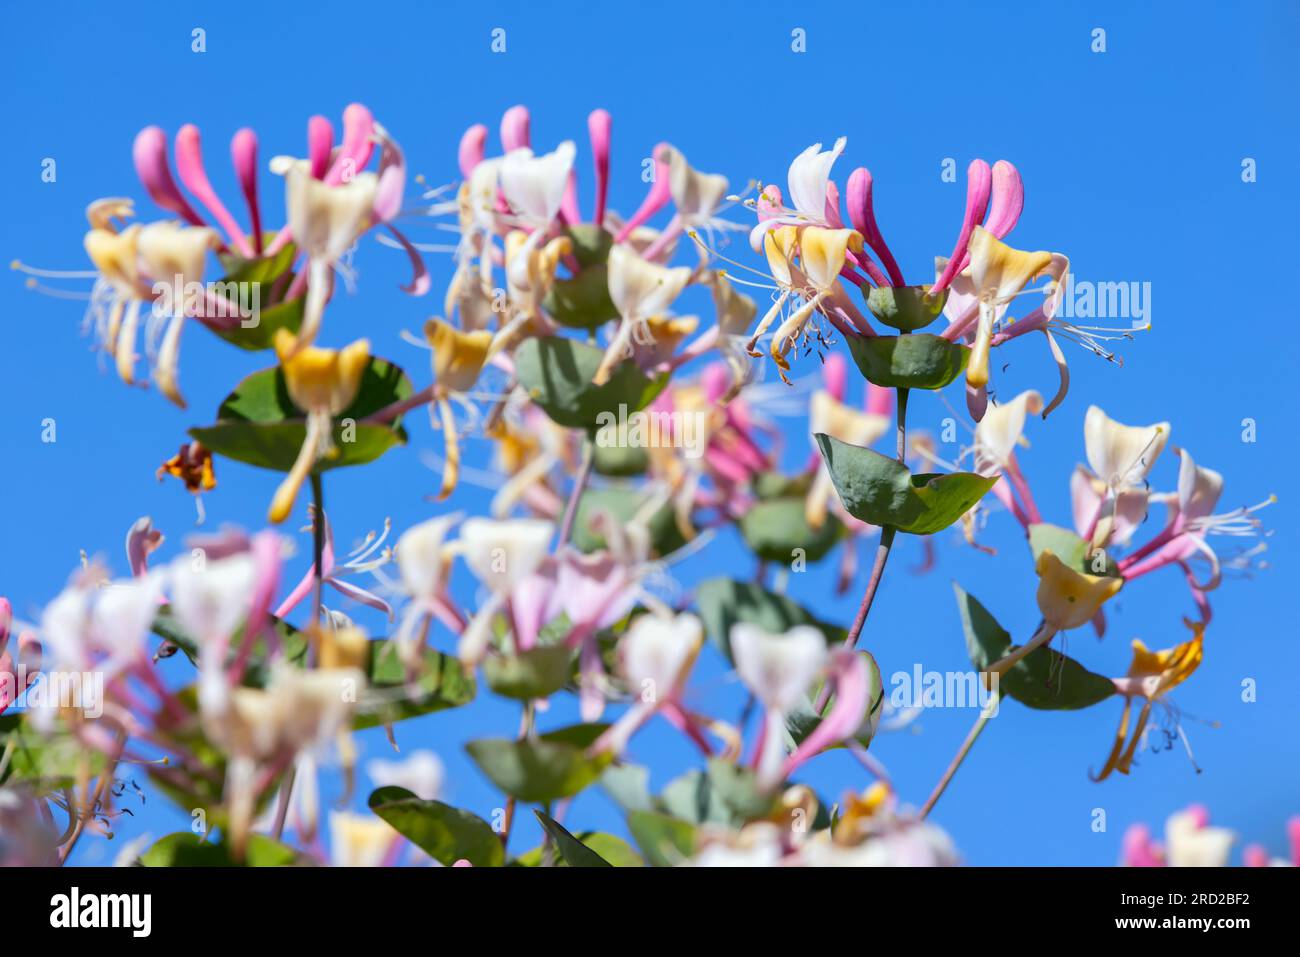 Lonicera caprifolium in bloom. Colorful flowers are under blue sky on a sunny day Stock Photo